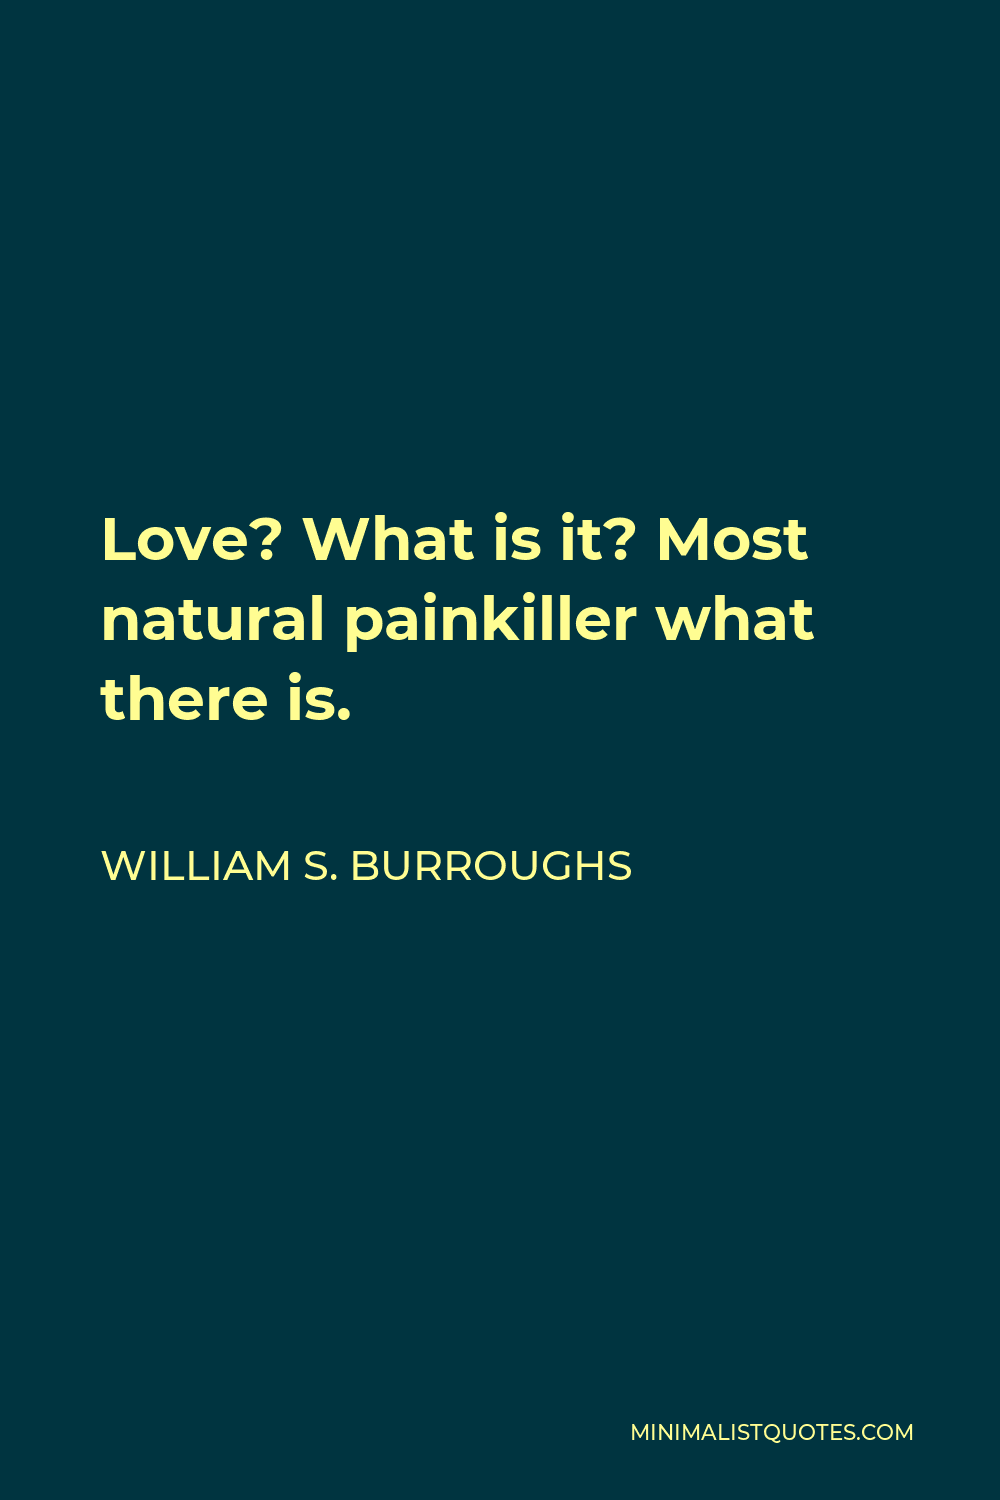 William S. Burroughs Quote - Love? What is it? Most natural painkiller what there is.